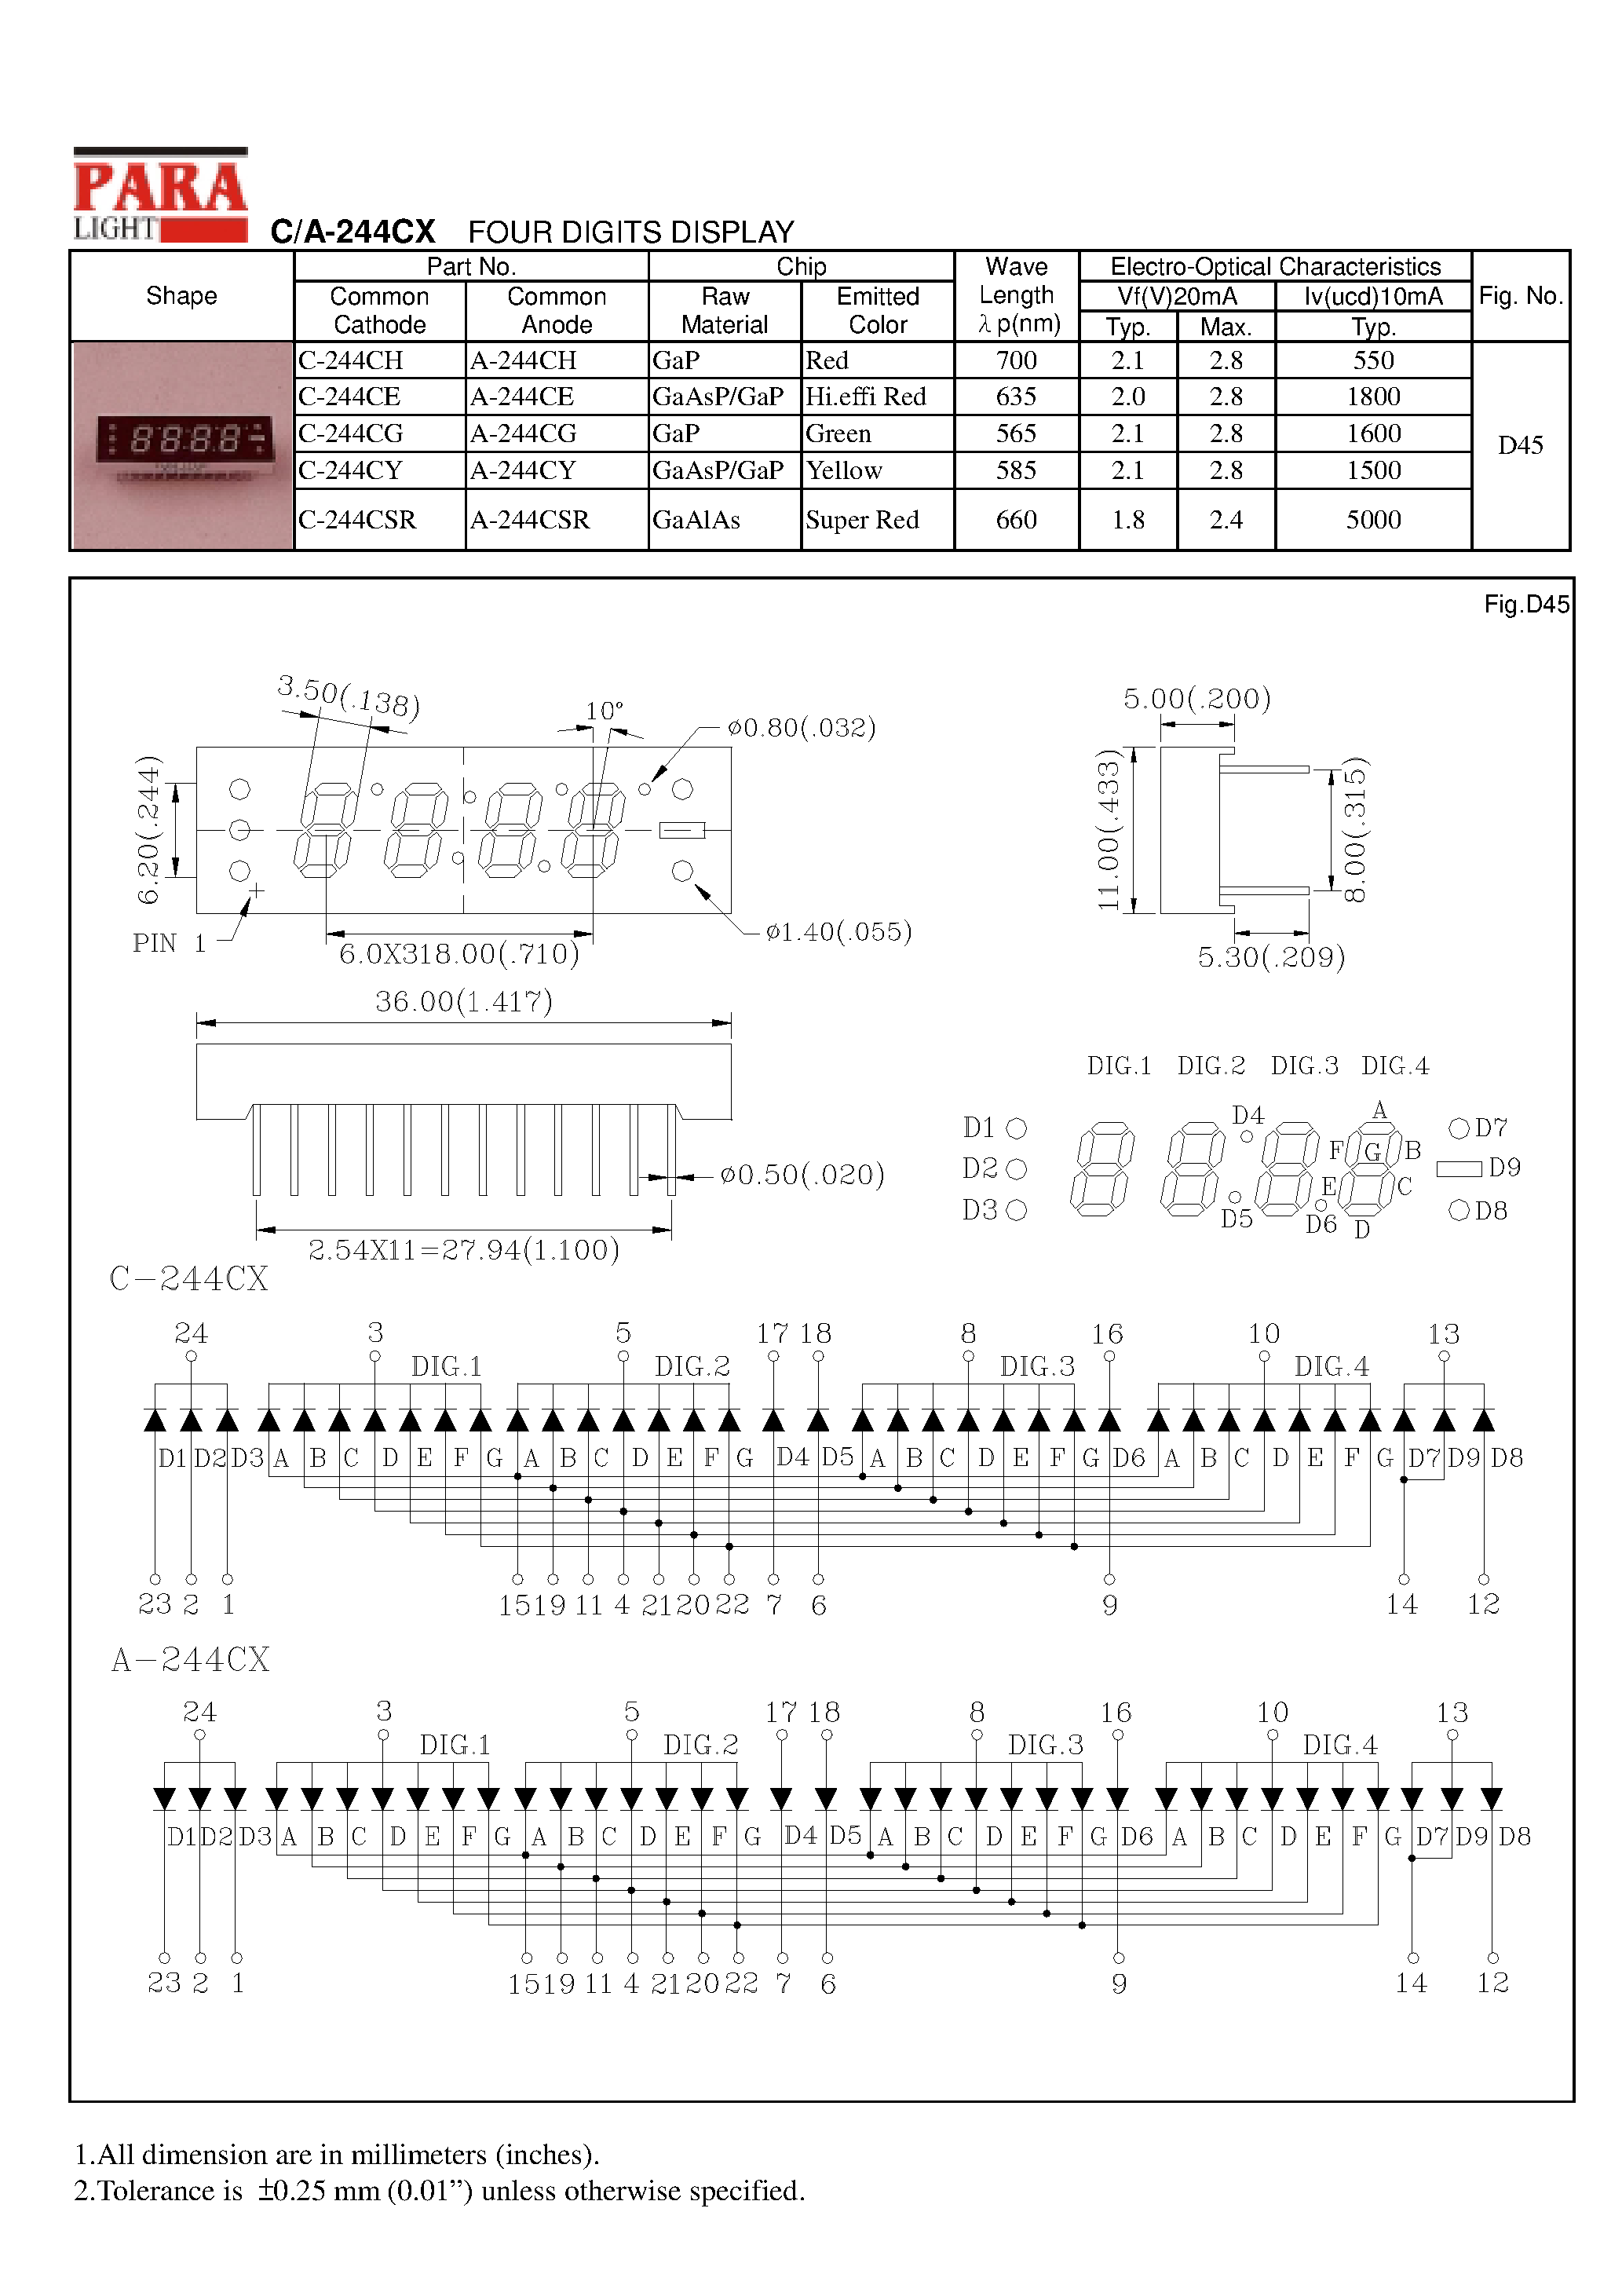 Datasheet A-244CH - FOUR DIGITS DISPLAY page 1